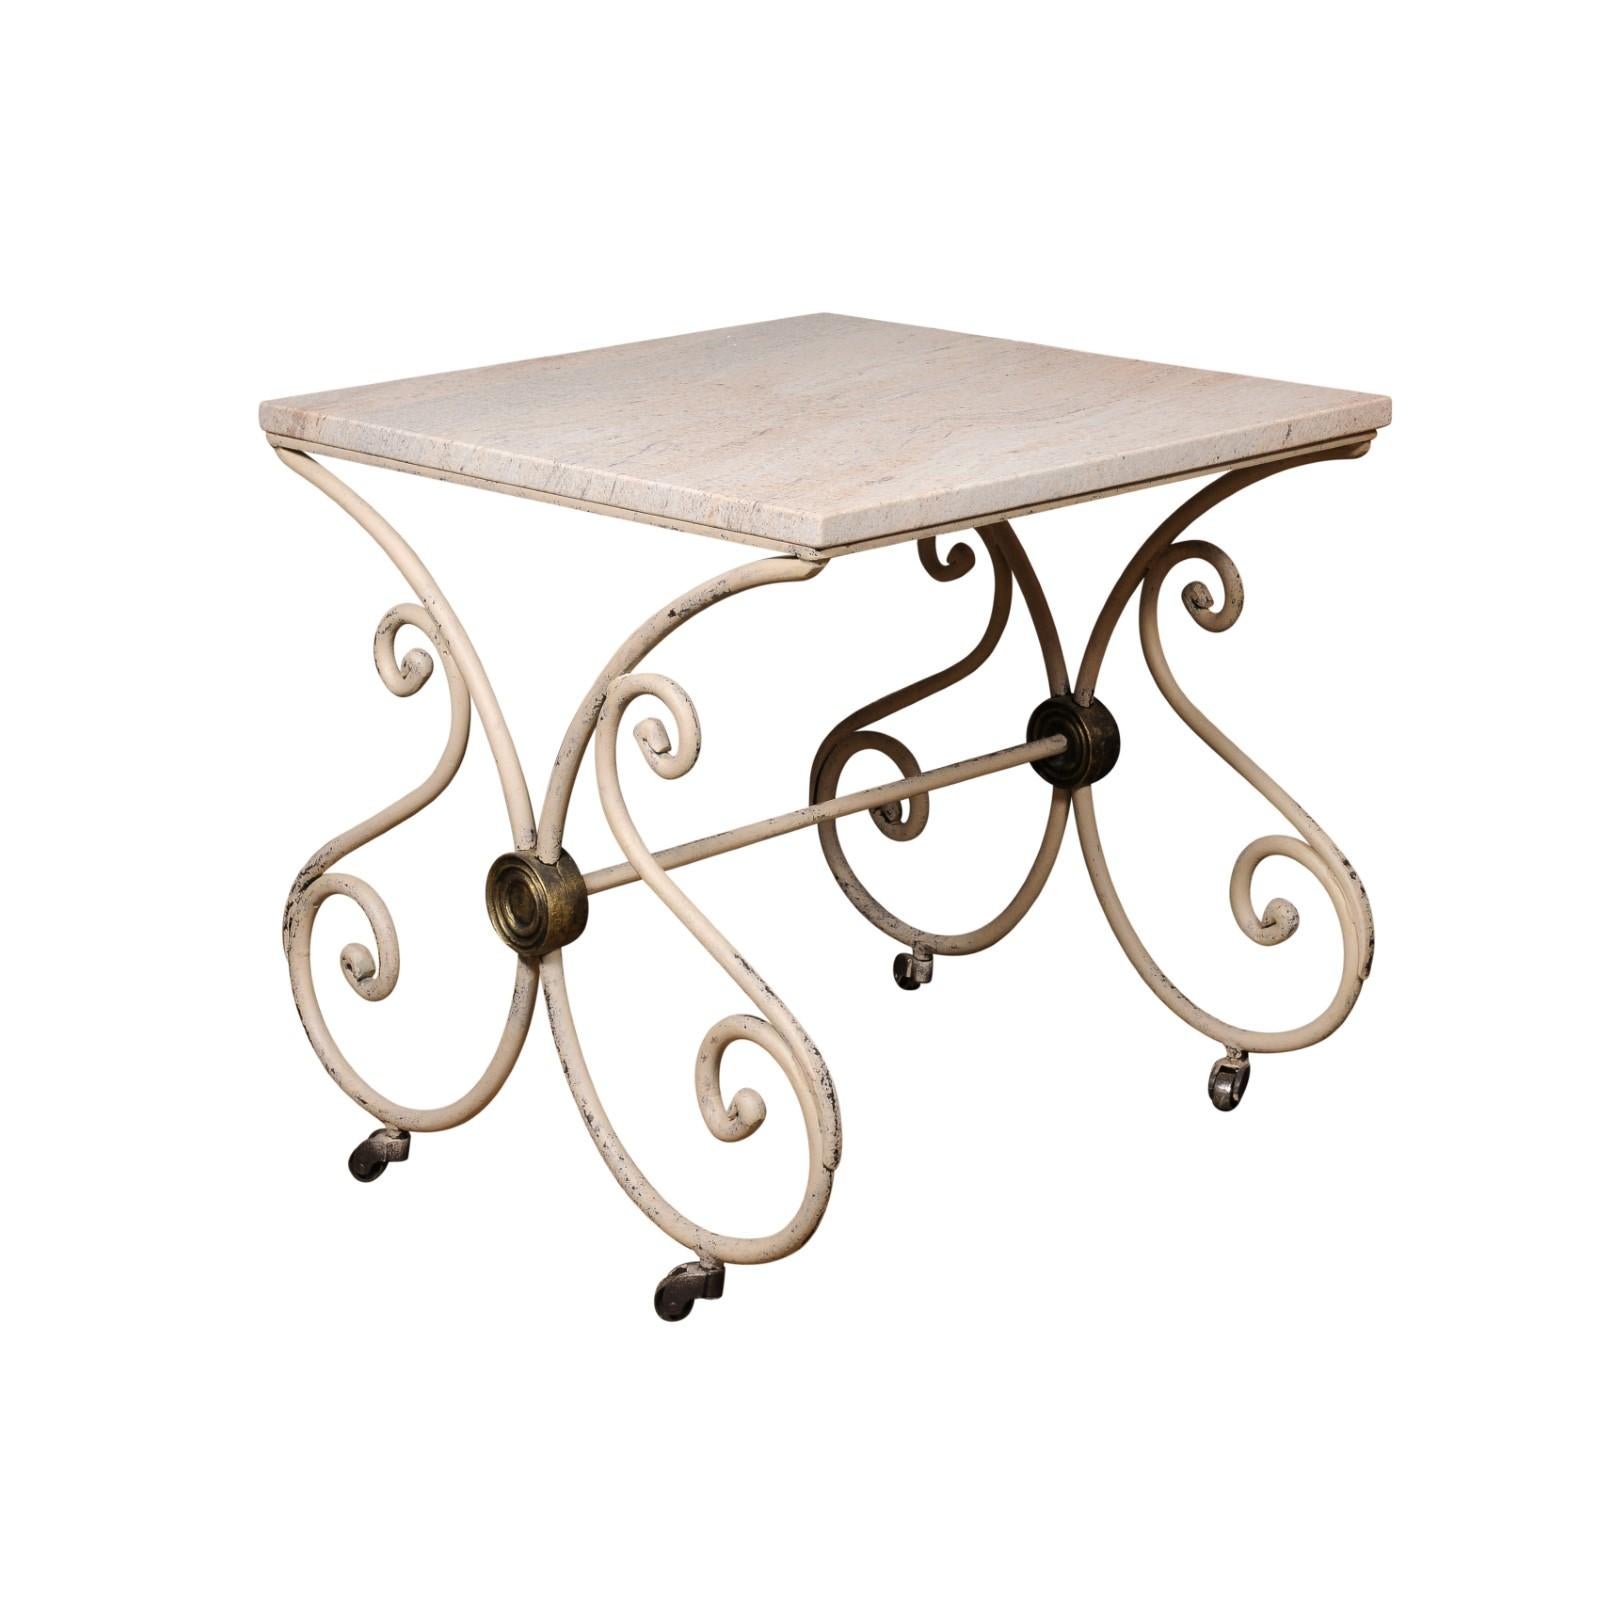 An antique French patisserie table from the late 19th century with recently added stone top and painted iron scrolling base on casters. Created in France during the last quarter of the 19th century at a time when the Impressionists when roaming the